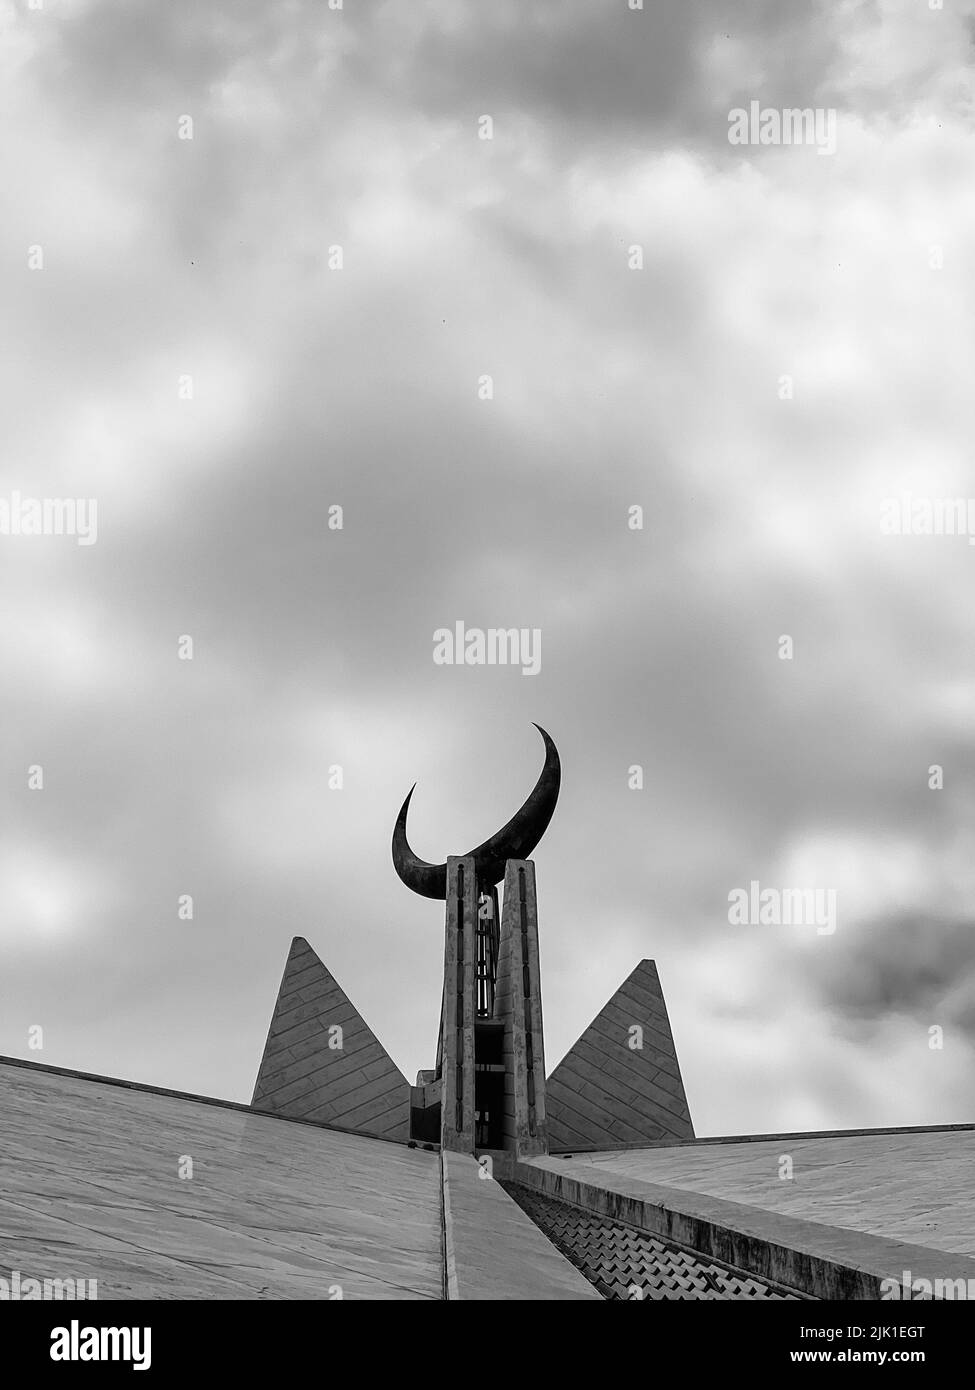 Closeup view of Islamic mosque architect with moon and clouds. Stock Photo